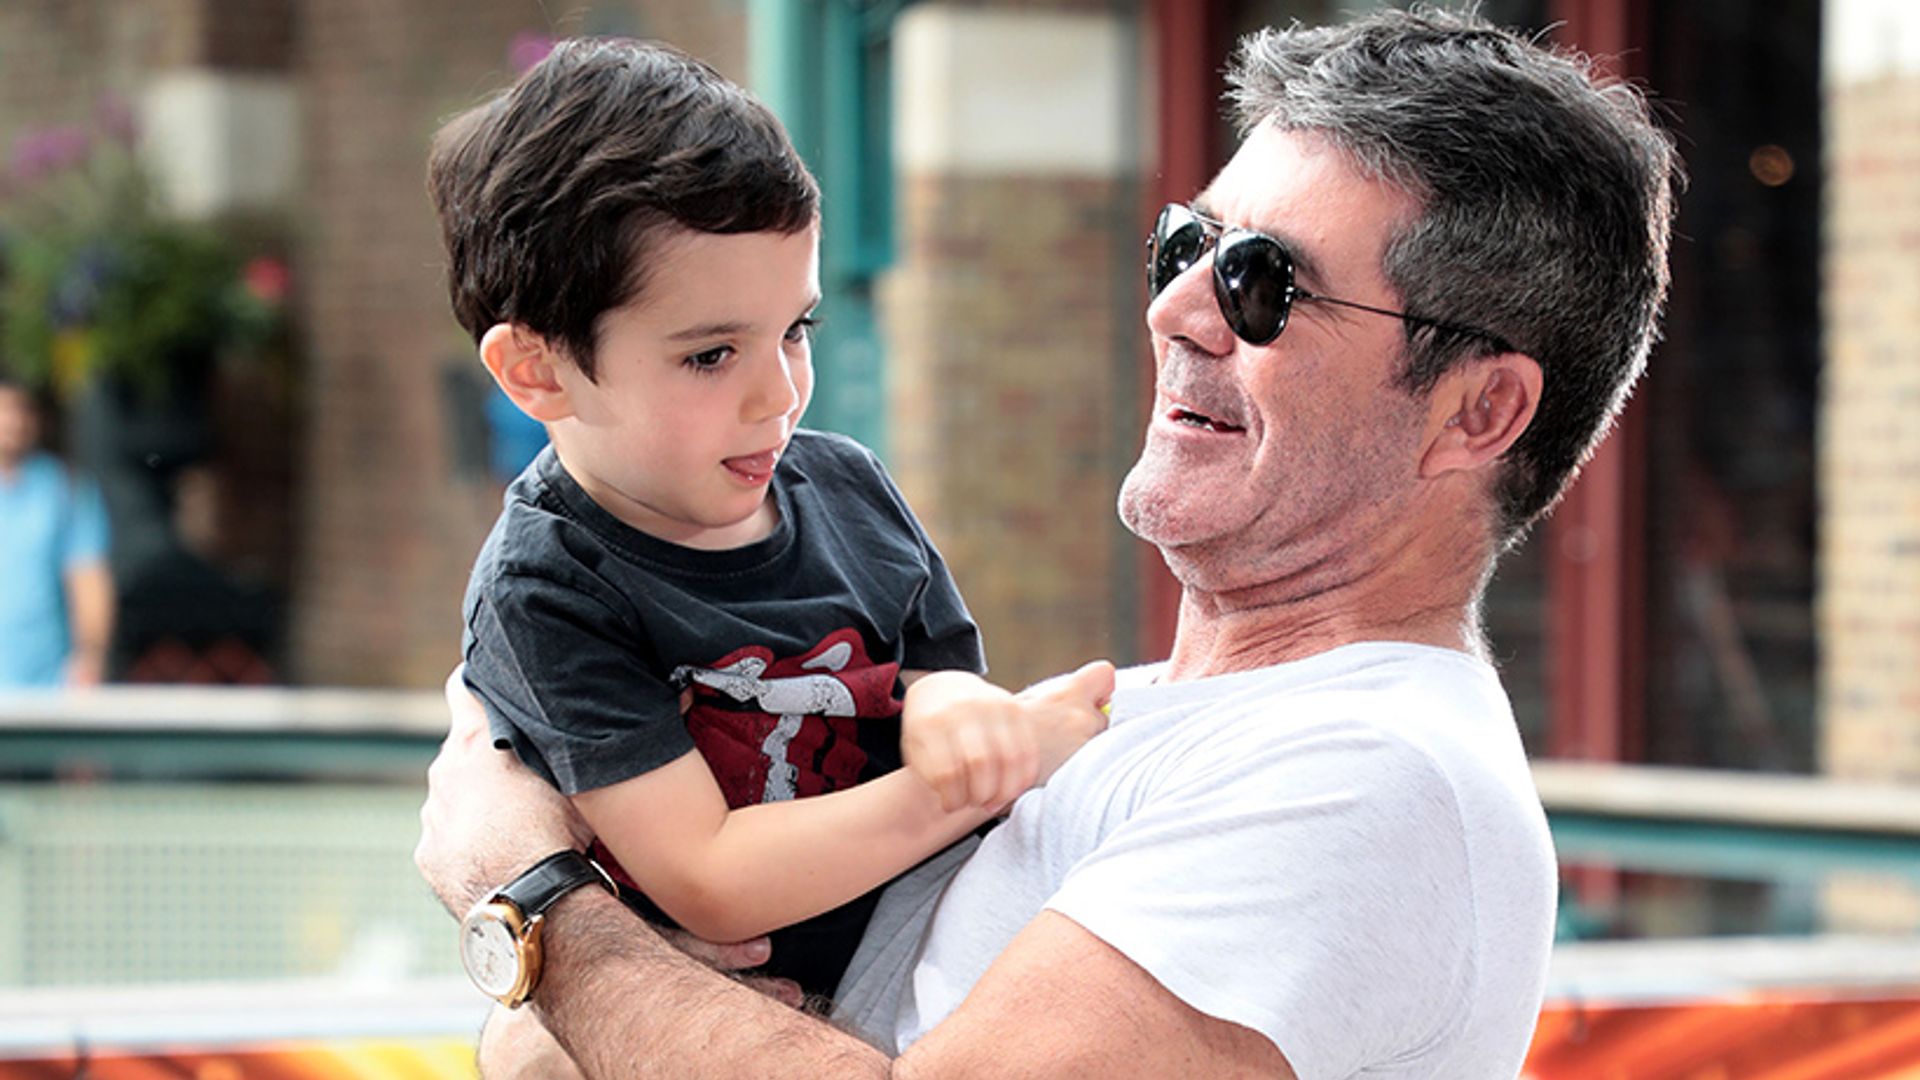 Simon Cowell carrying his son in his arms